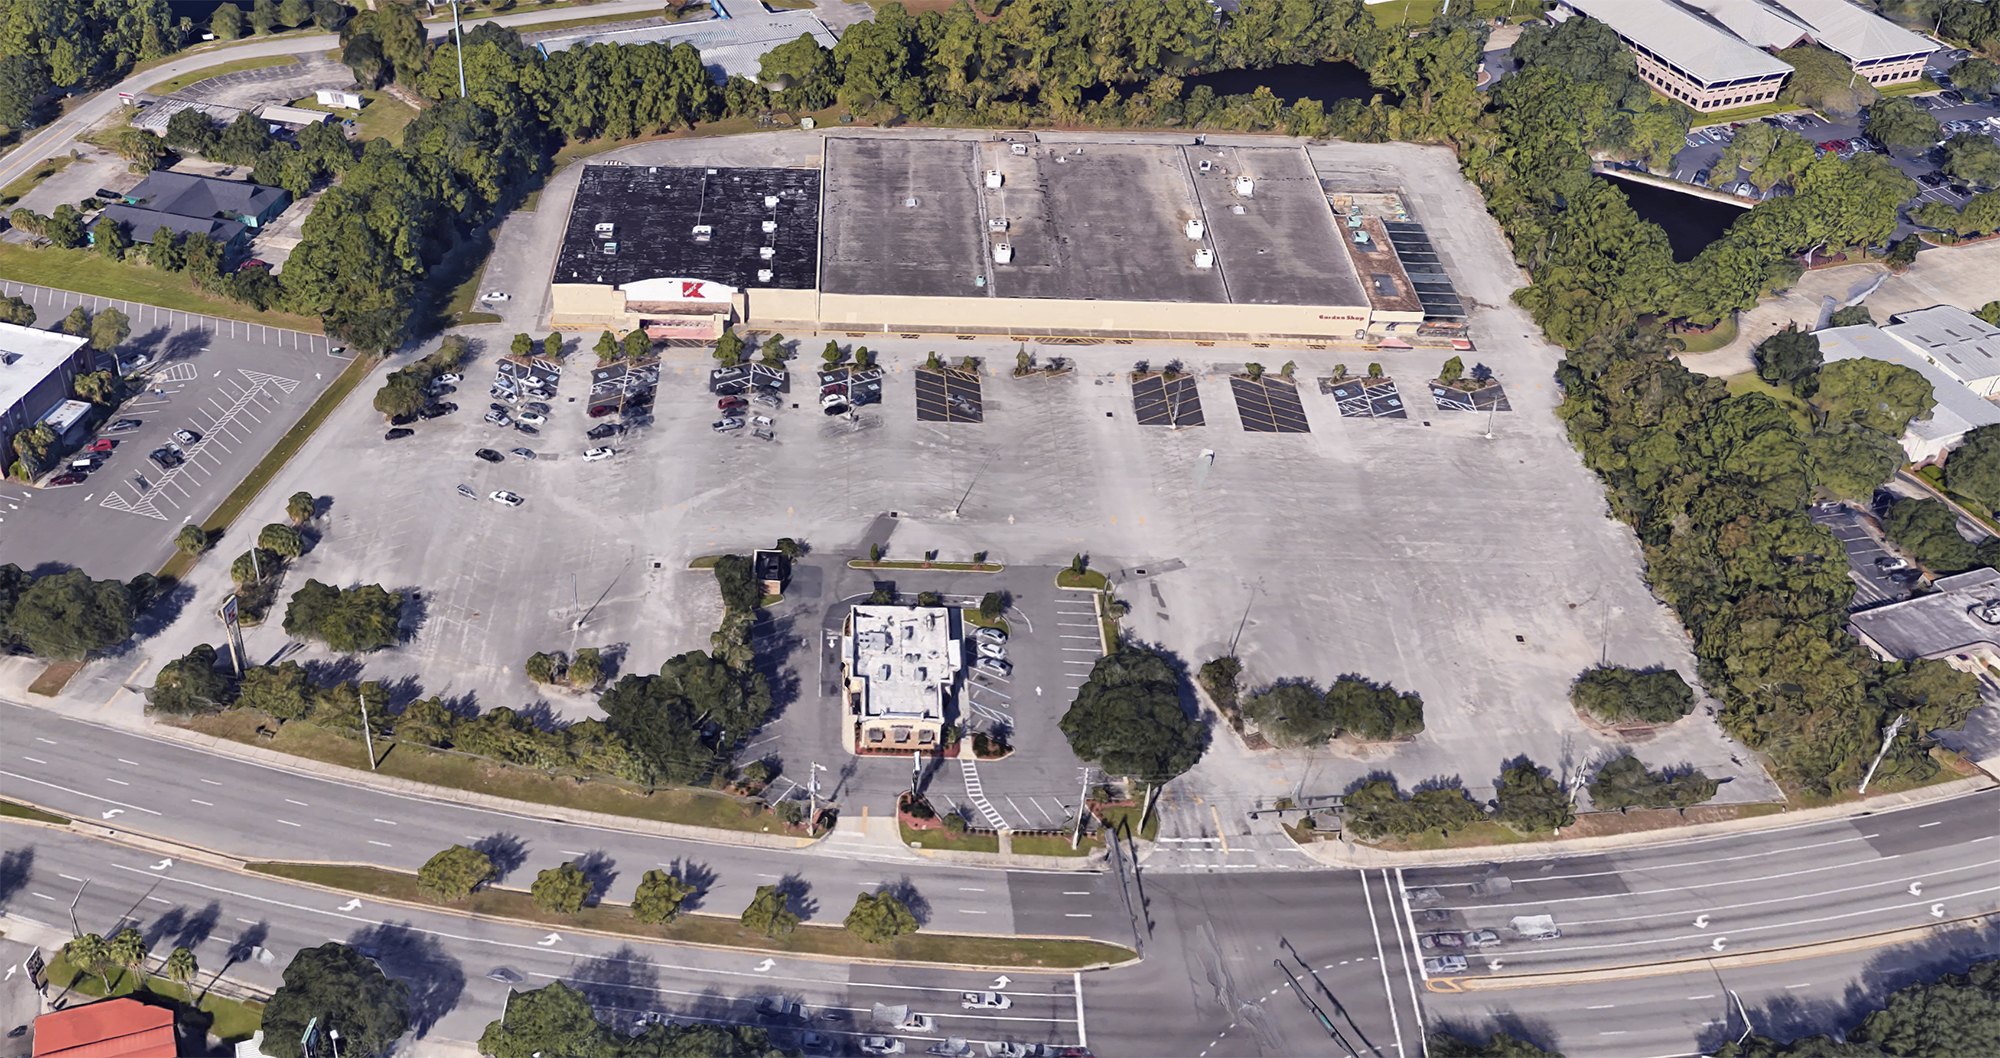 A satellite image of the kmart site. The Zaxby's restaurant in the parking lot is separately owned. (Google)